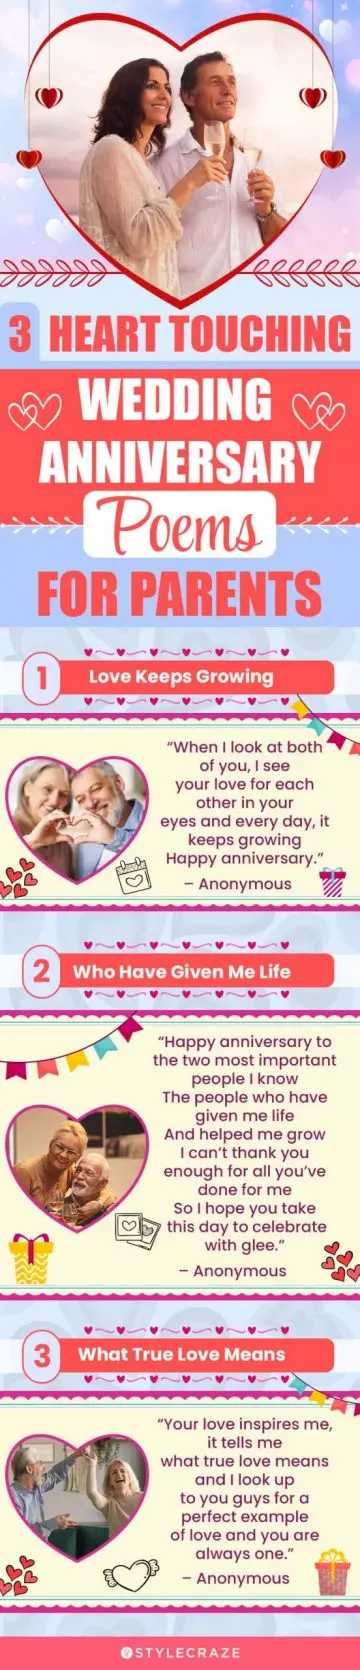 3 heart touching wedding anniversary poems for parents (infographic)